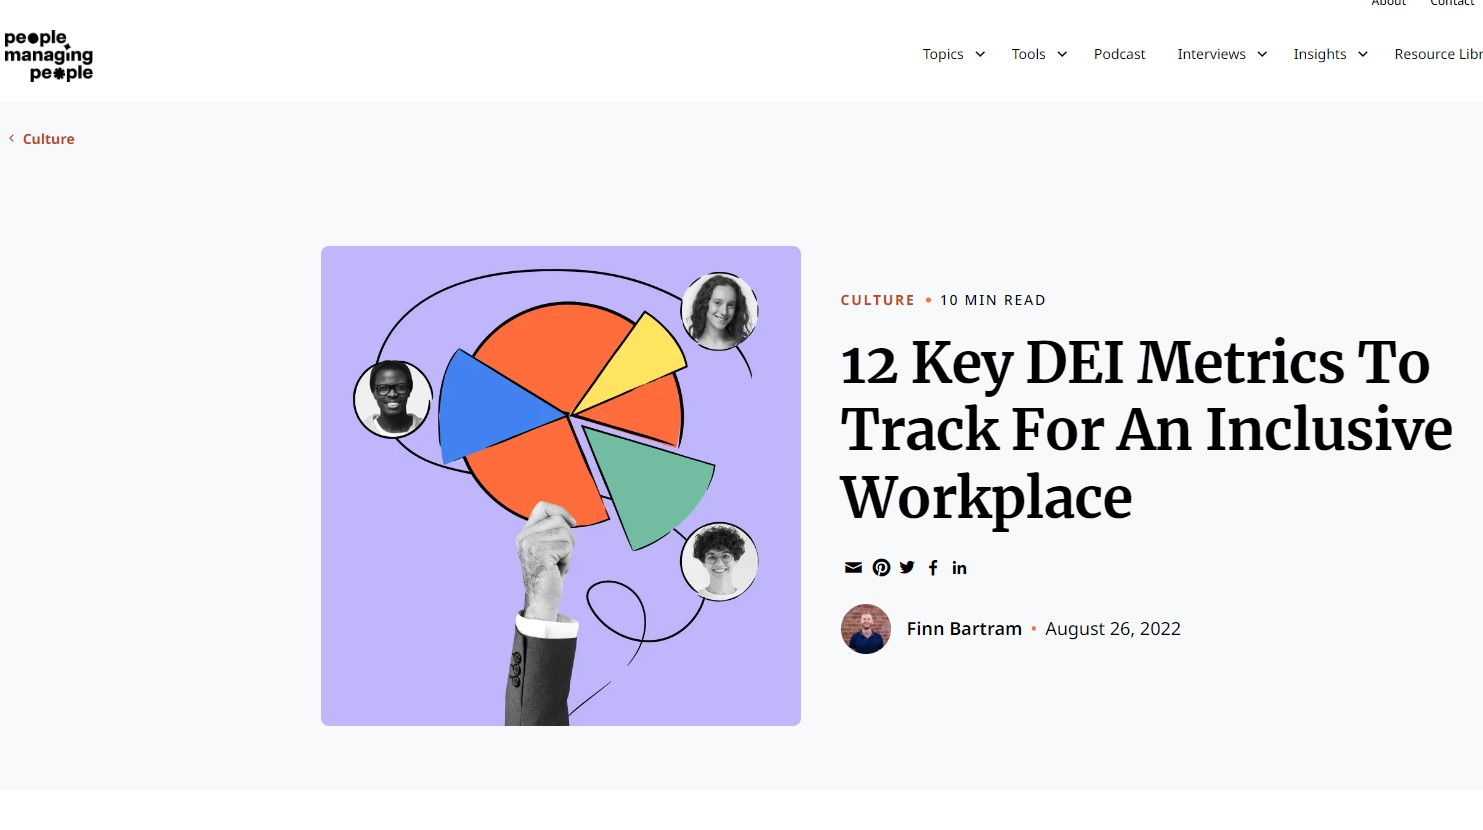 12 Key DEI Metrics To Track For An Inclusive Workplace